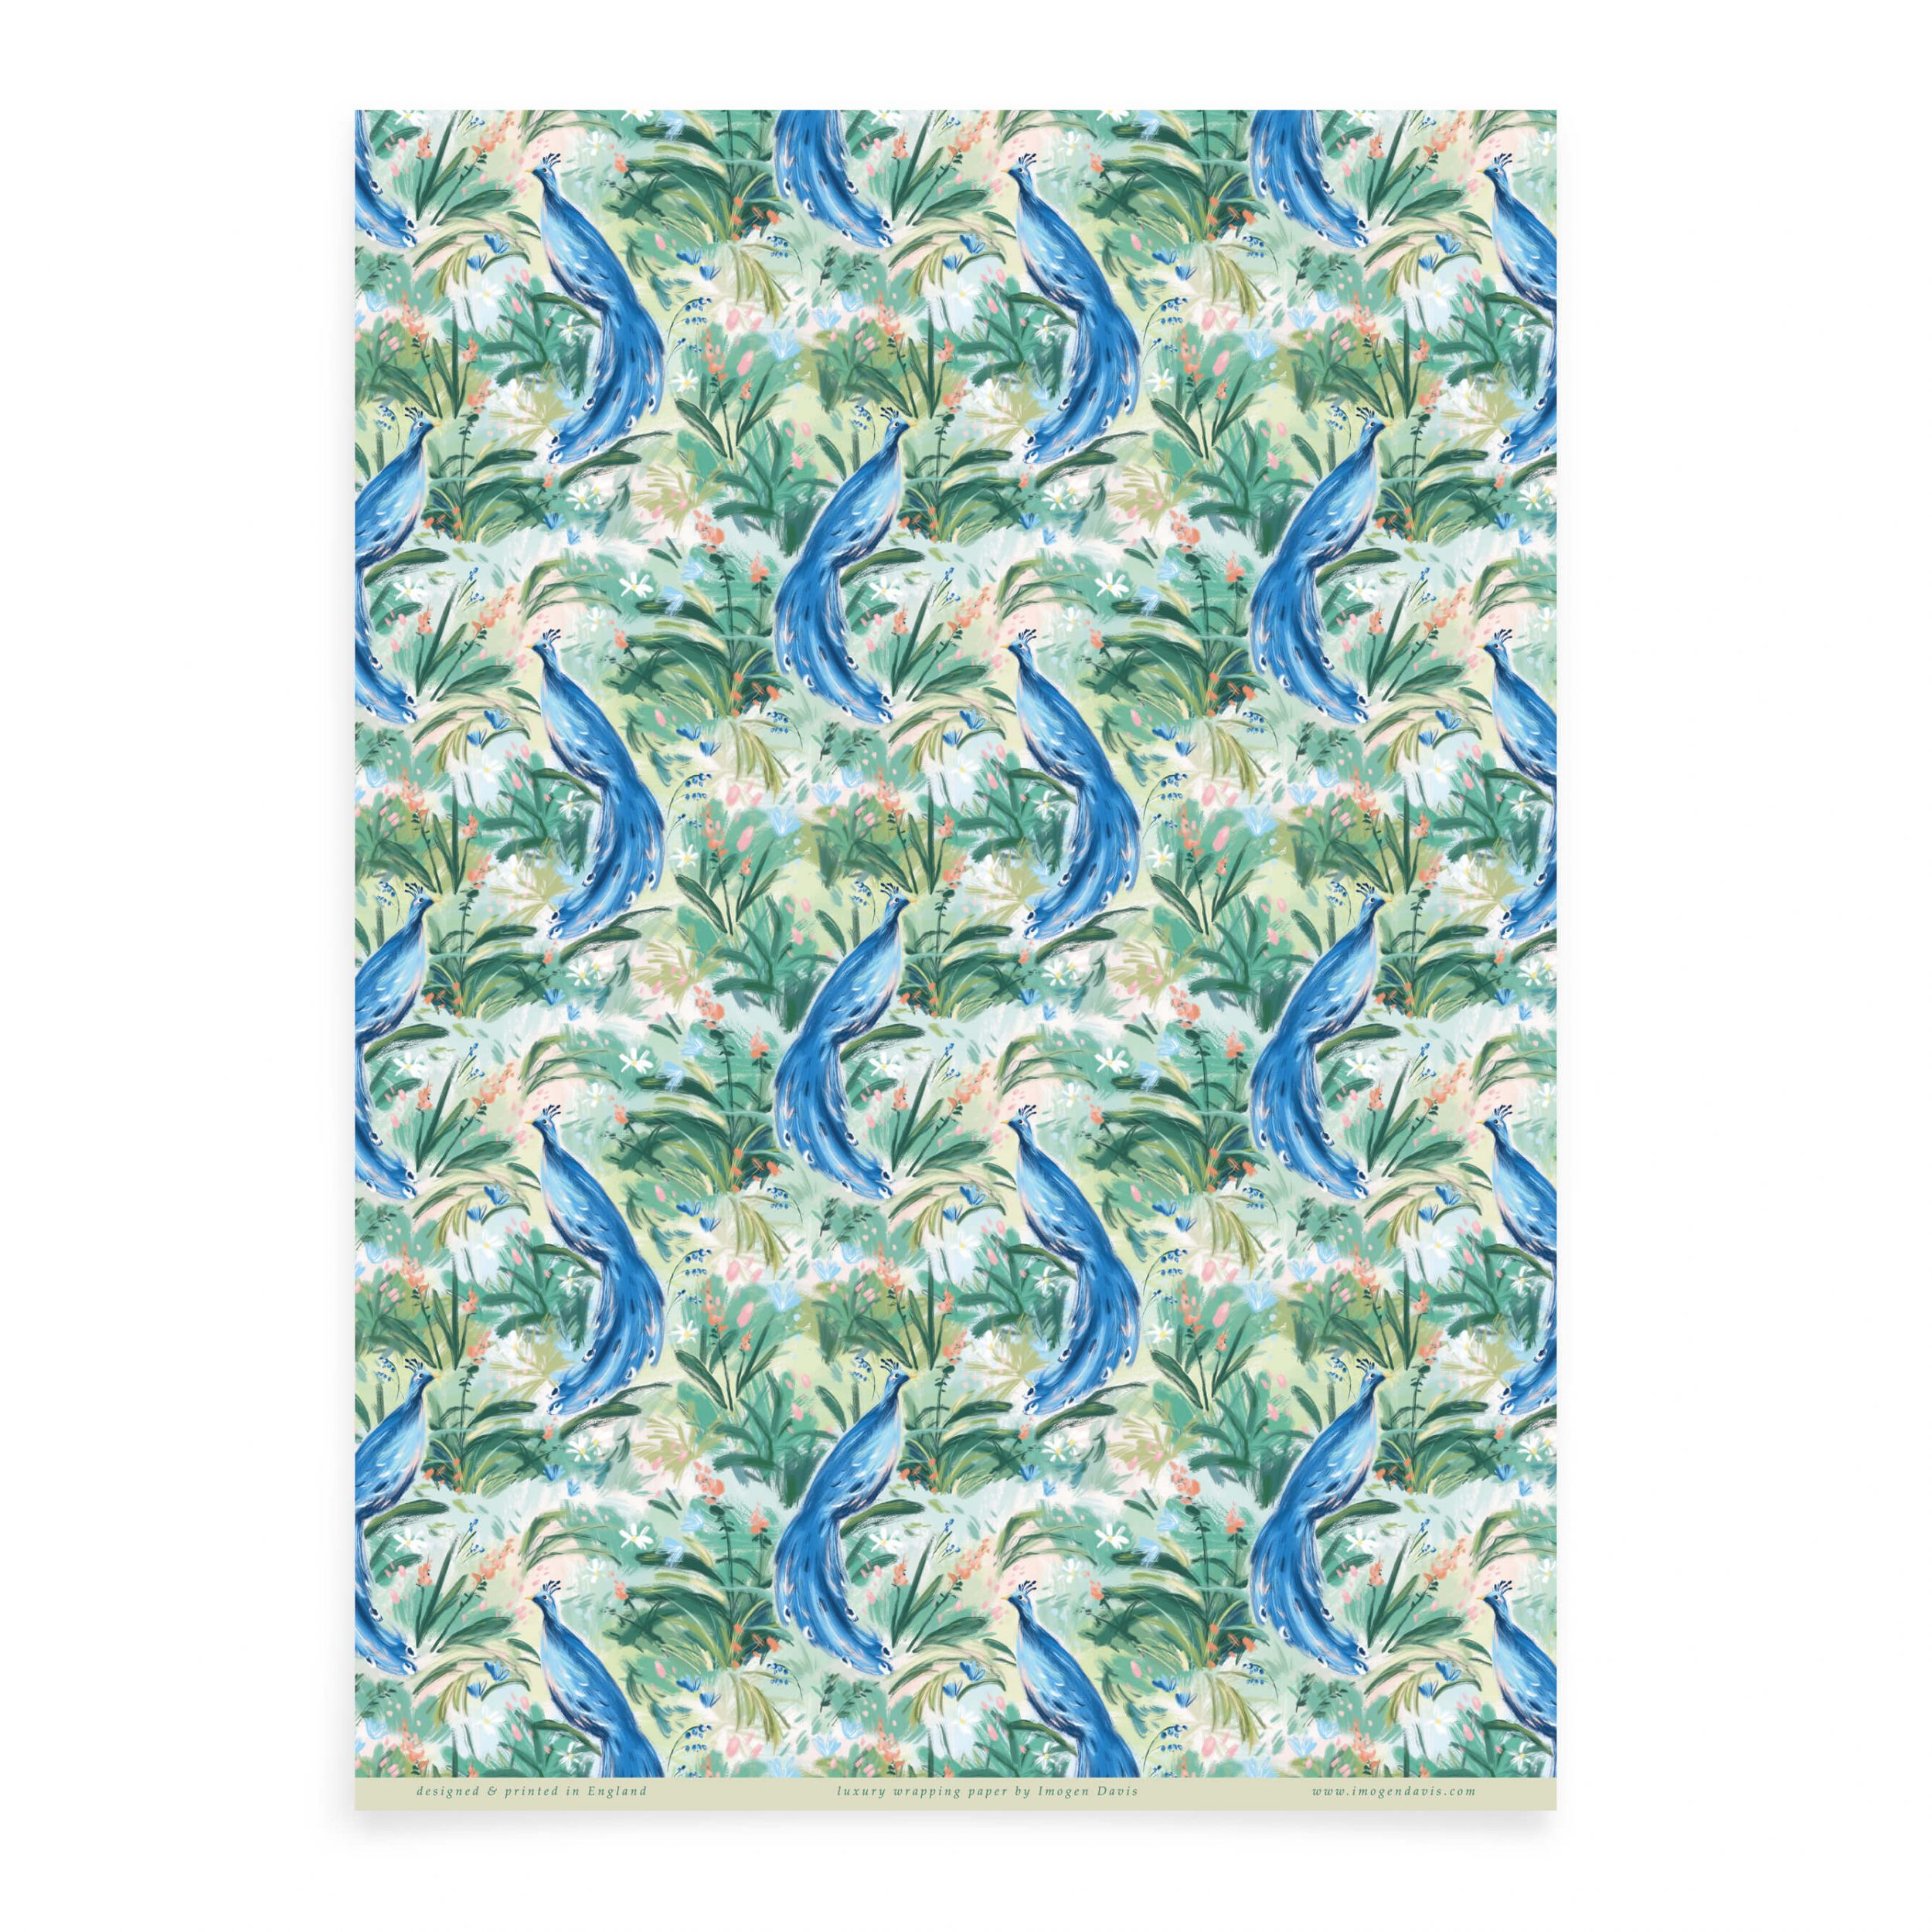 Green Birds of Paradise Birthday Gift Wrap Wrapping Paper Recycled 3 sheets